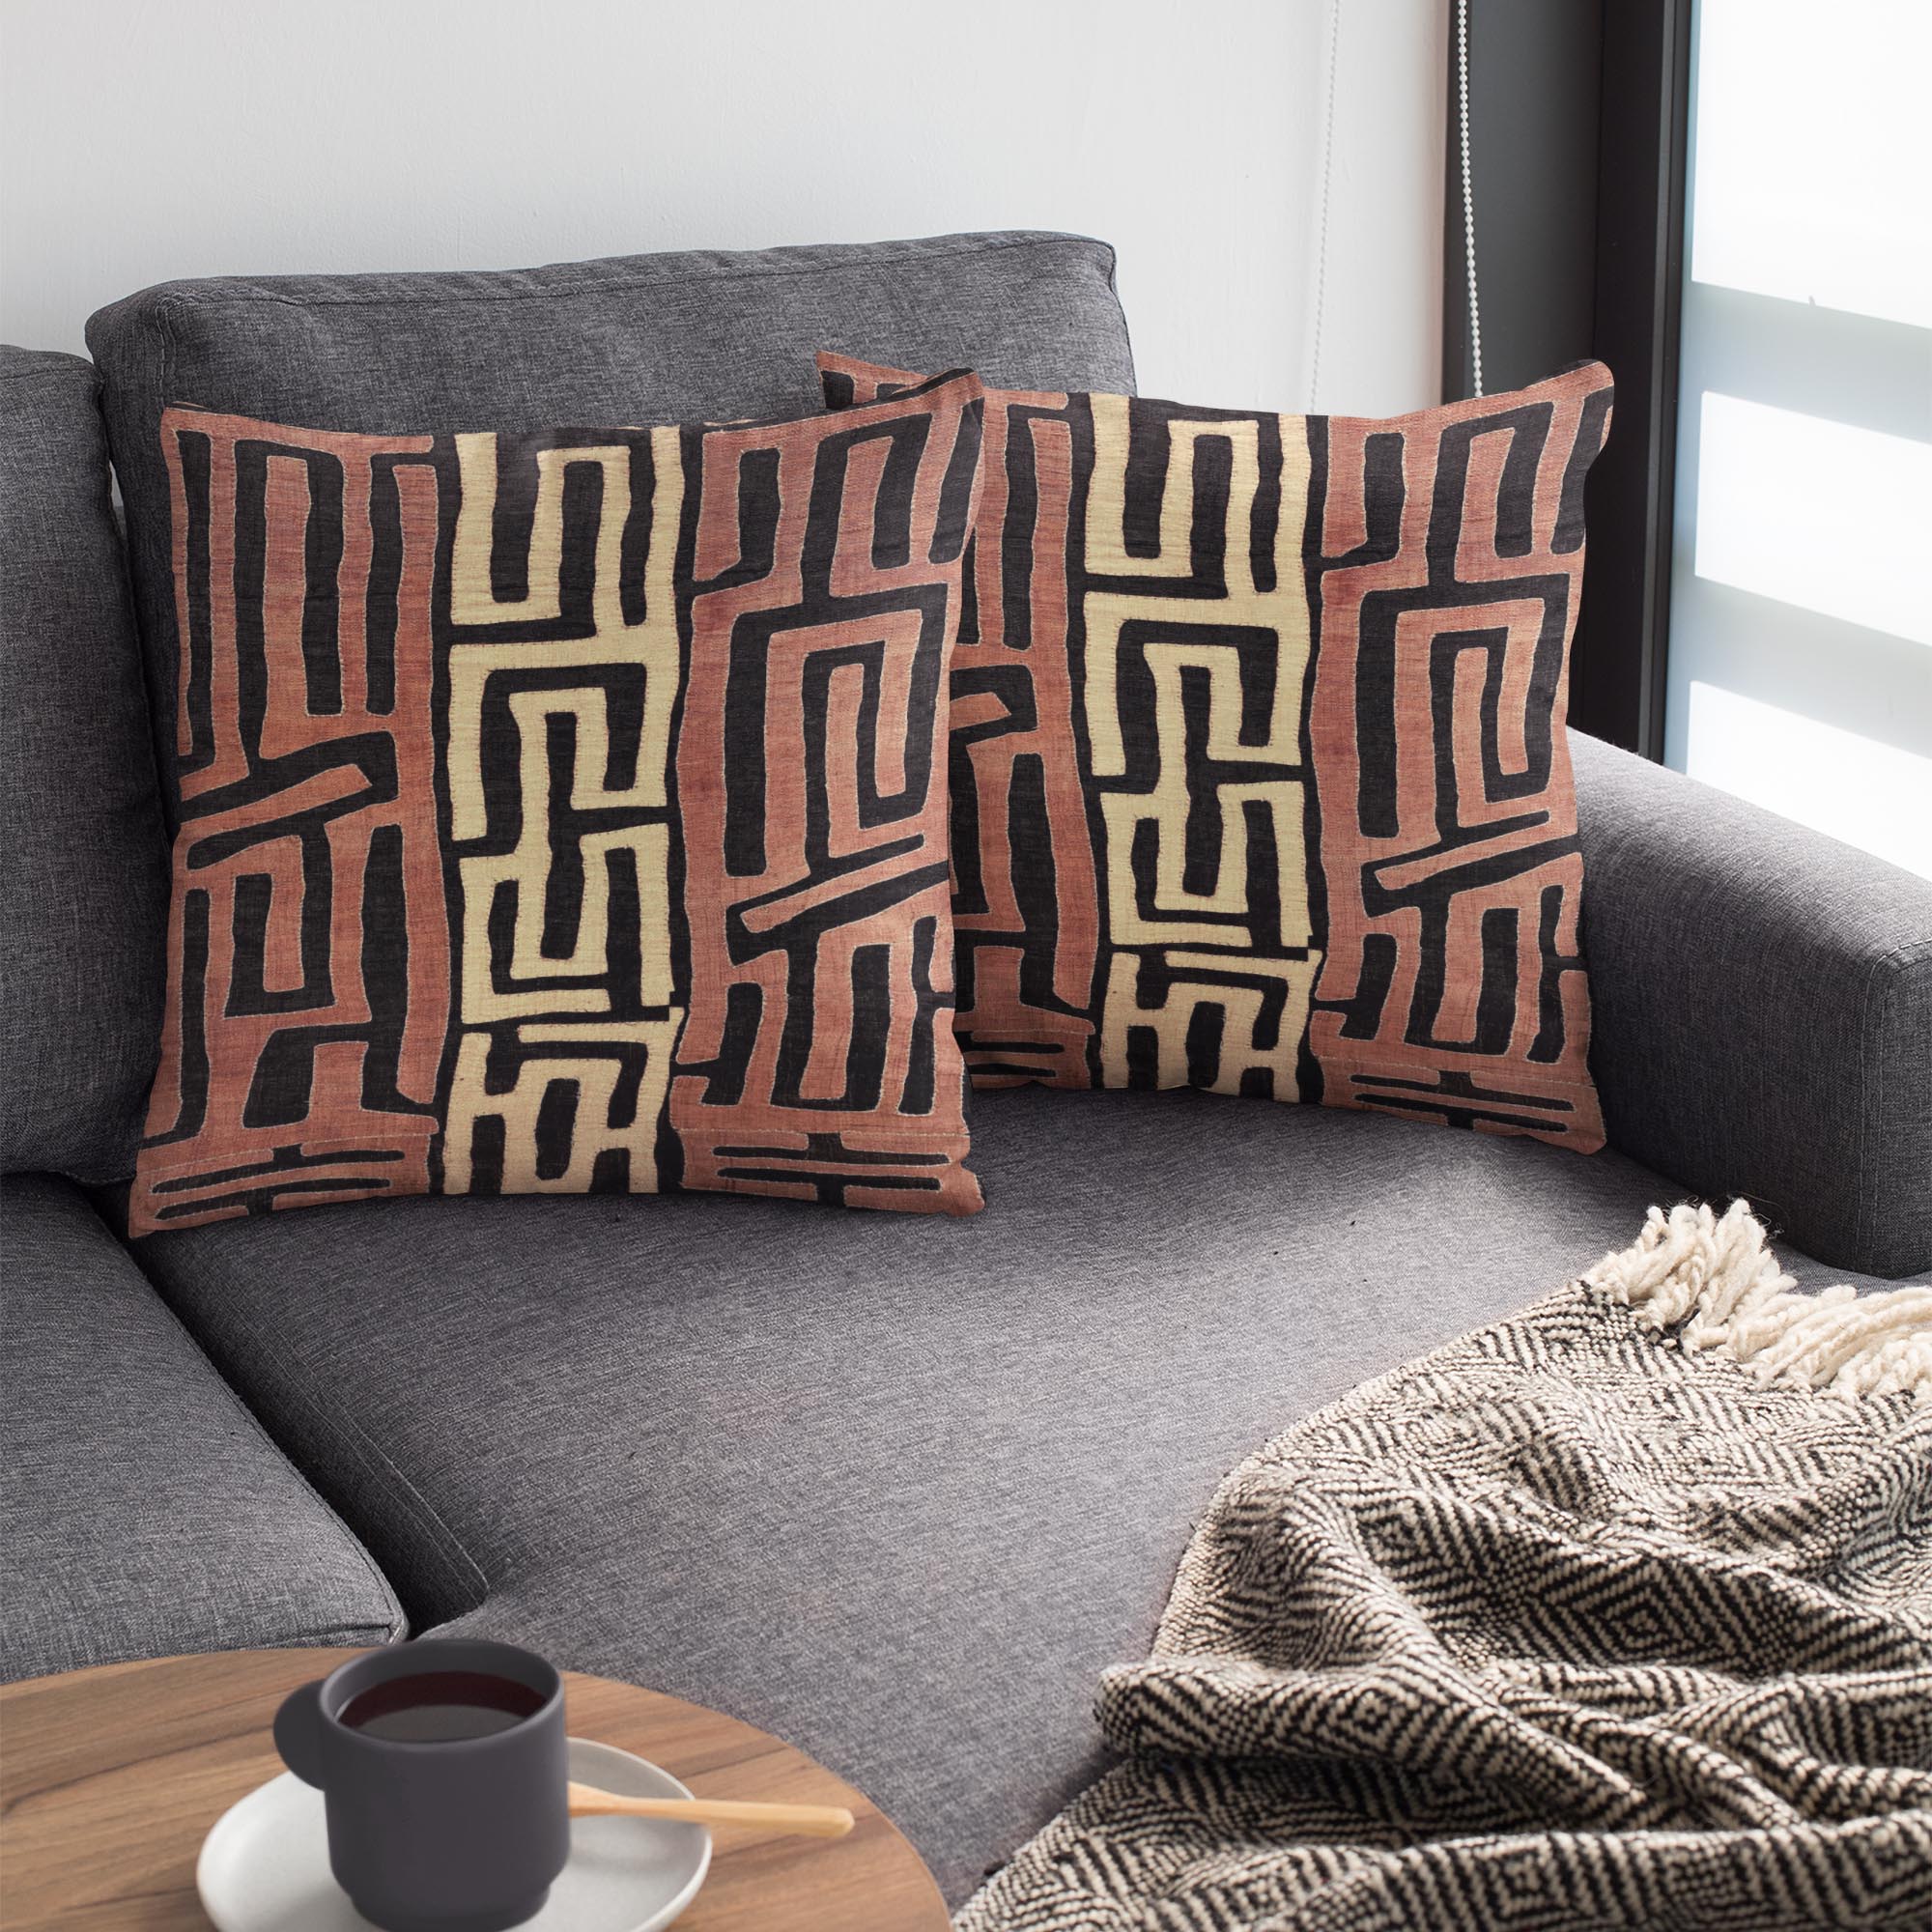 Home Decor 20" × 20" Mudcloth, Kuba Cloth African Tribal Pillow | Vintage Ethnic Afrocentric | Abstract Mali Throw Pillow